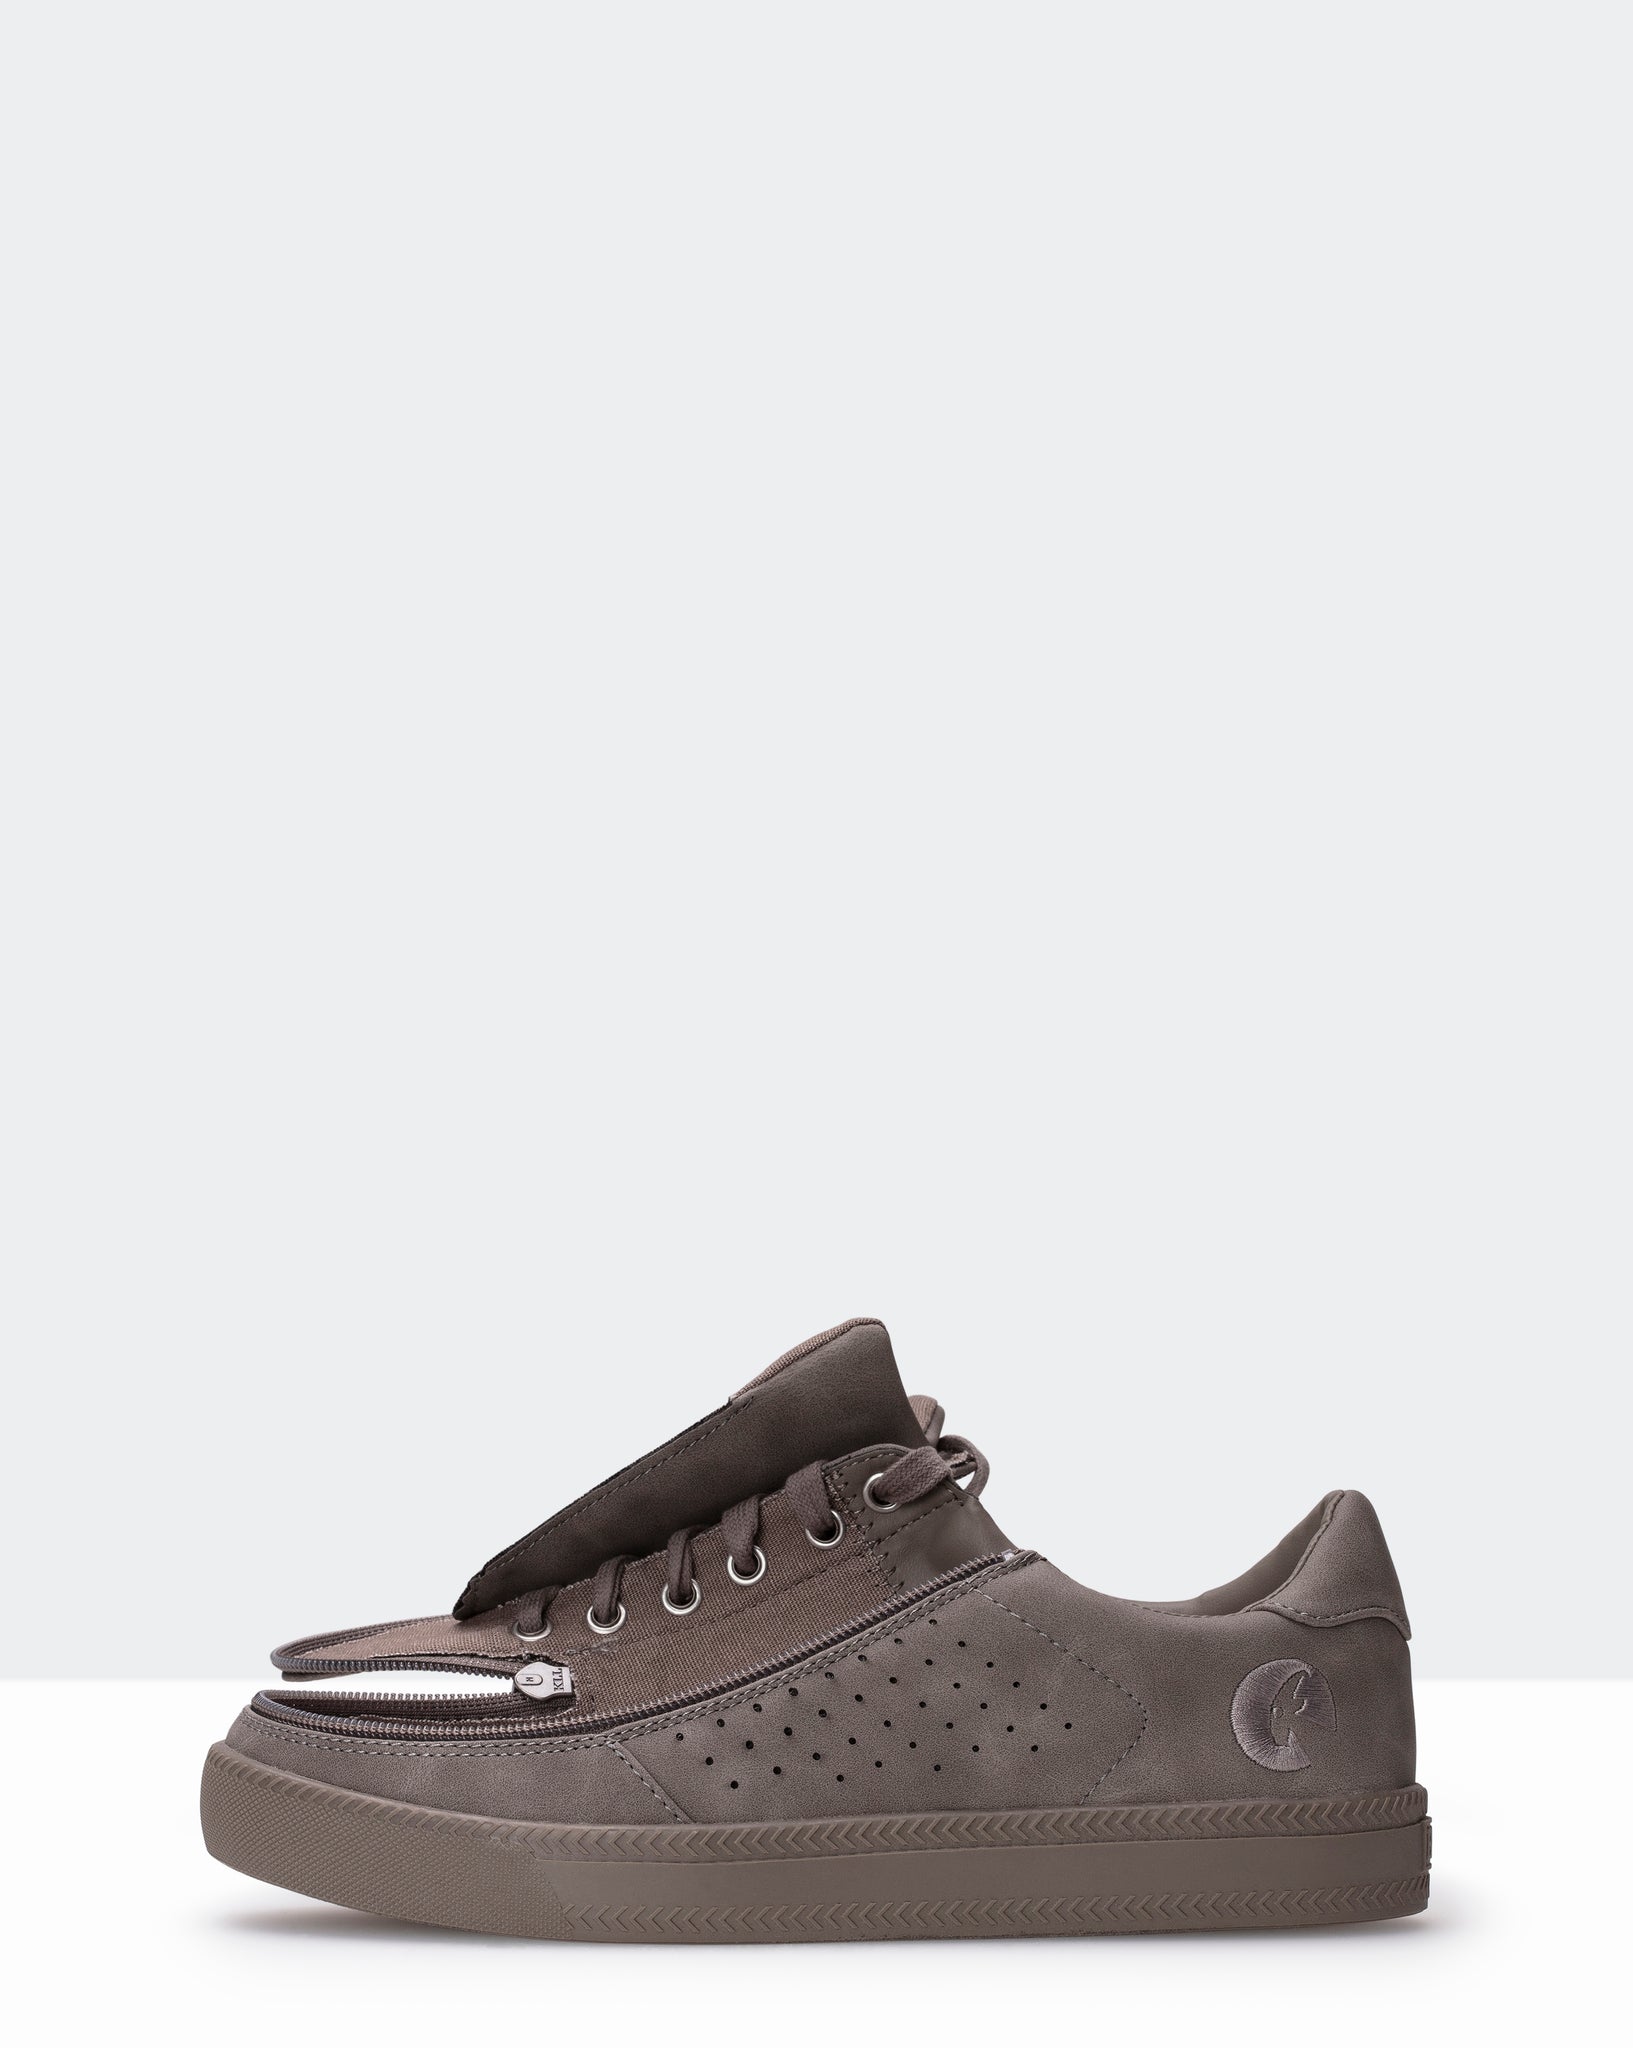 Low Rise Sneaker (Men) - Charcoal to the Floor